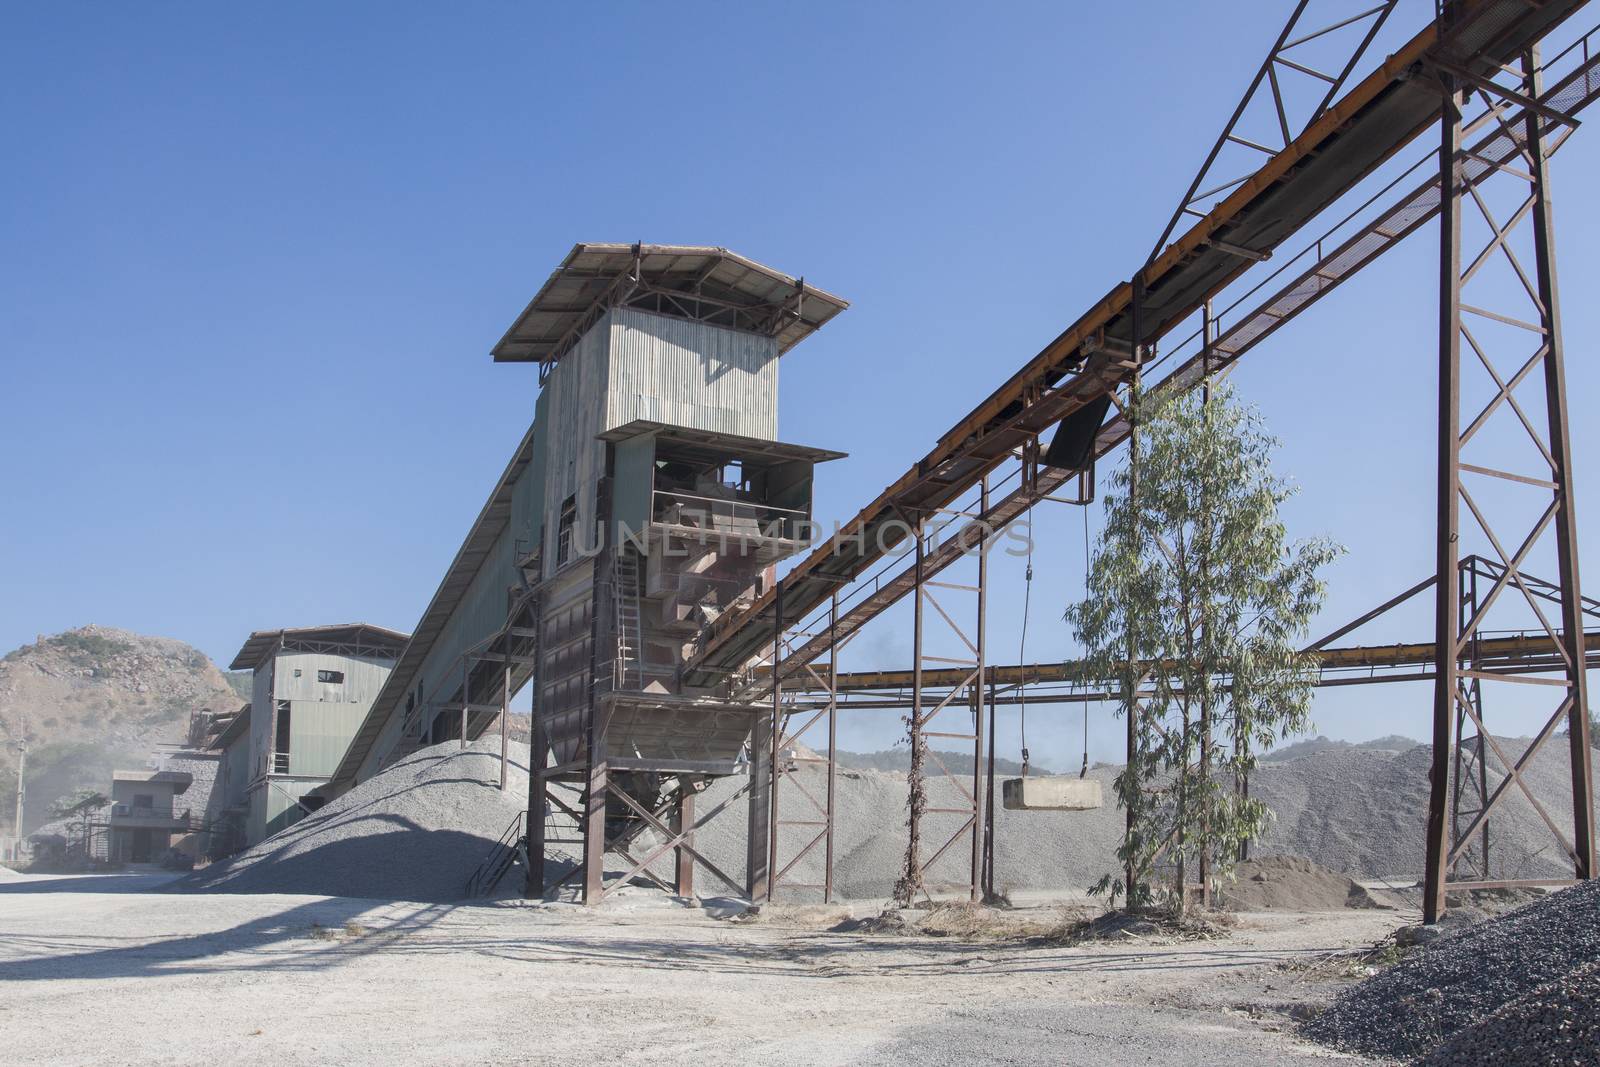 rock crusher machine industry chain moving to logistic gravel us by khunaspix